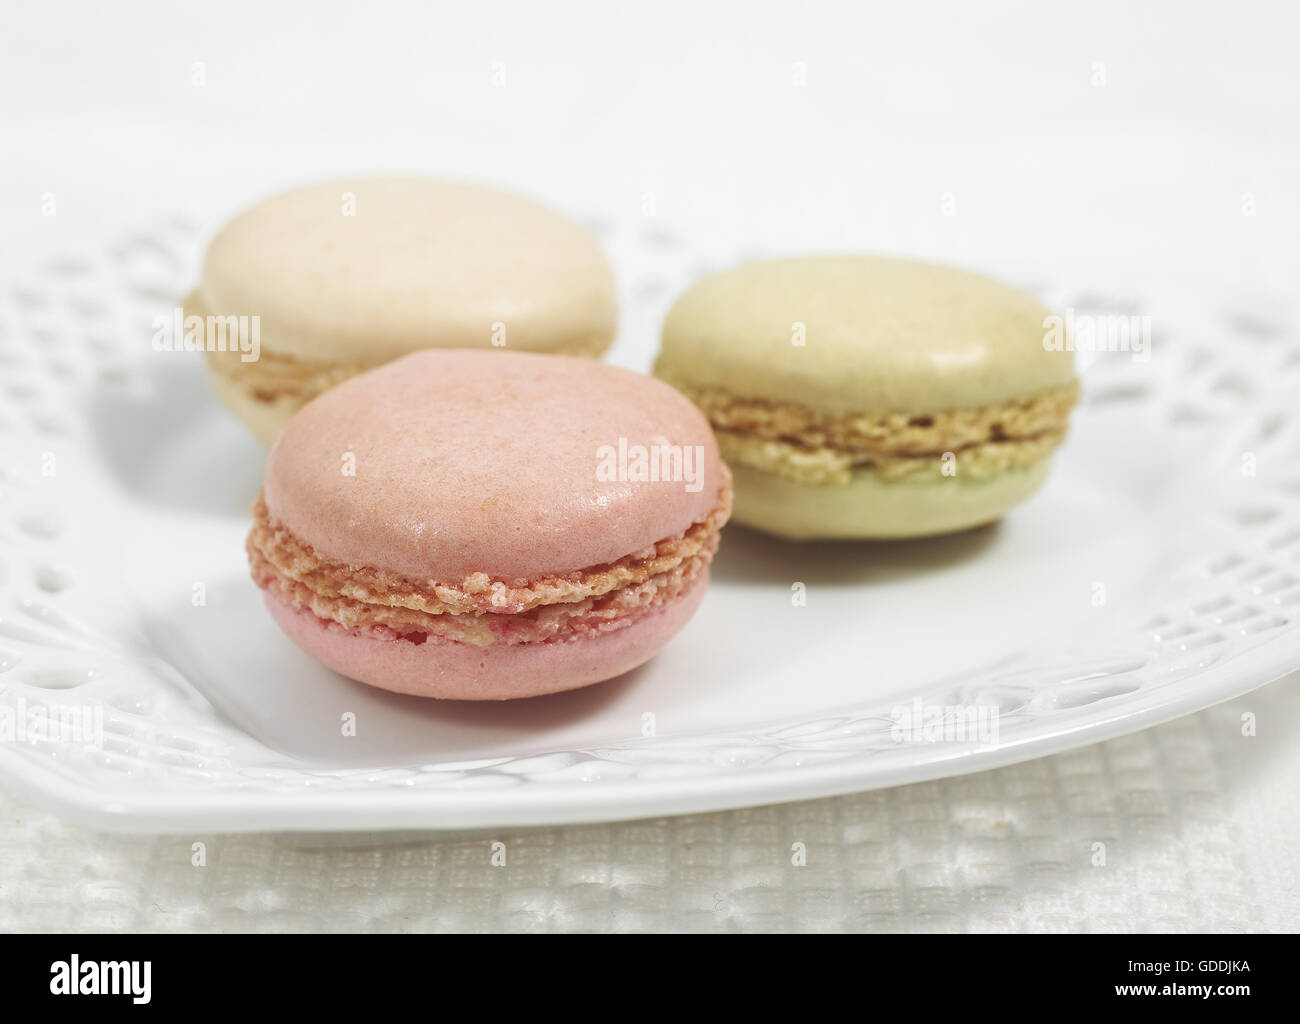 Plate with Macaroons Stock Photo